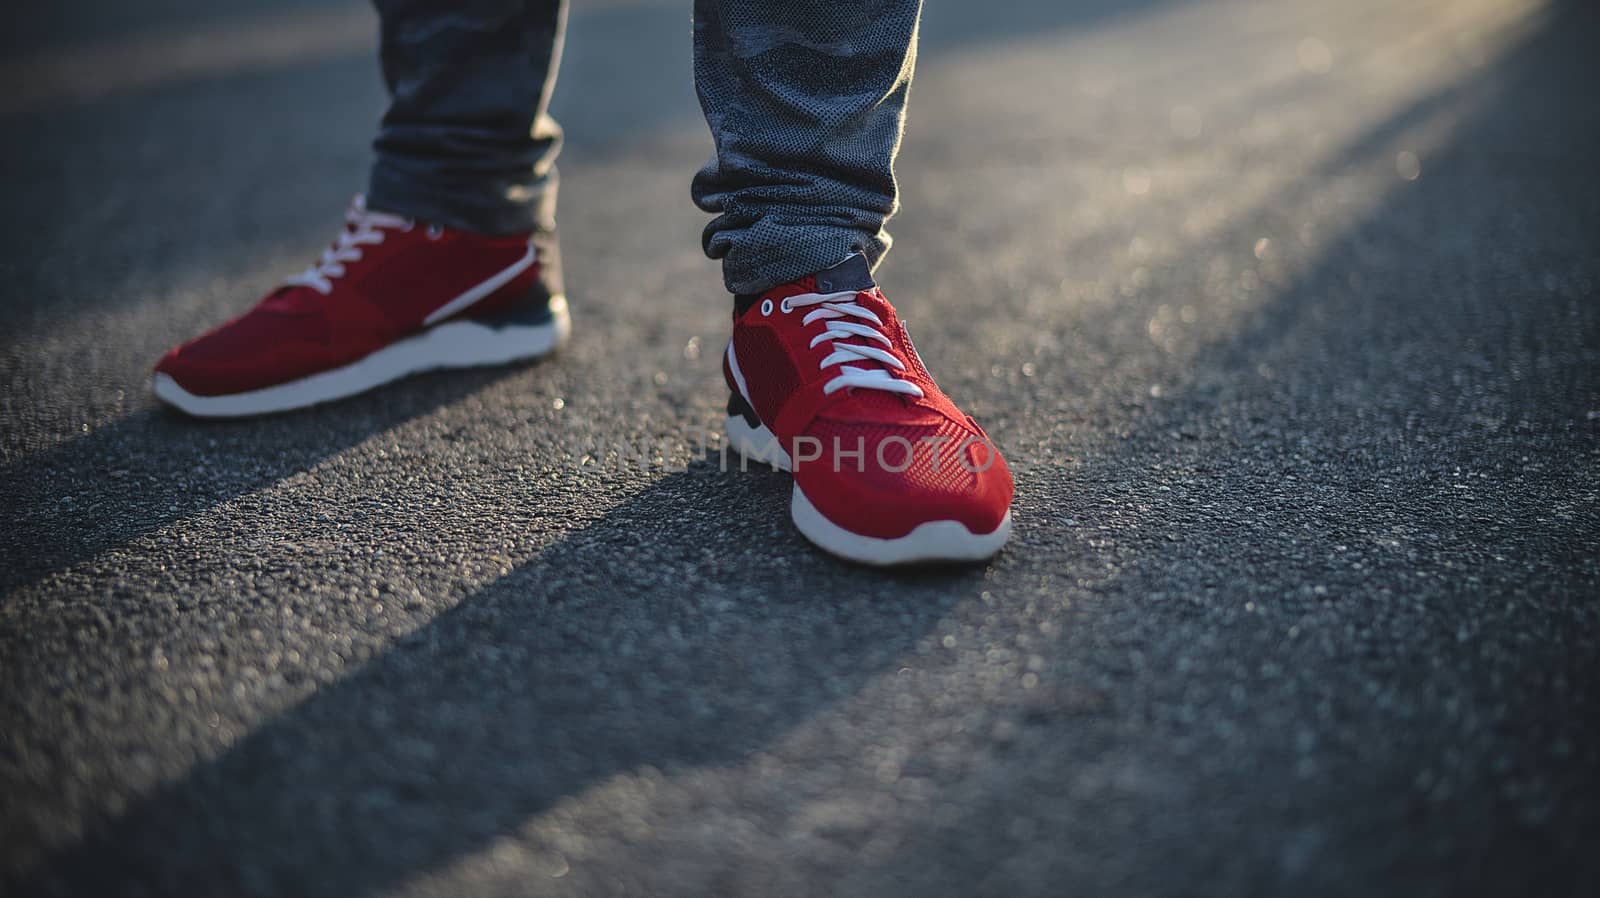 Man in sneakers walks down the street on a sunny day